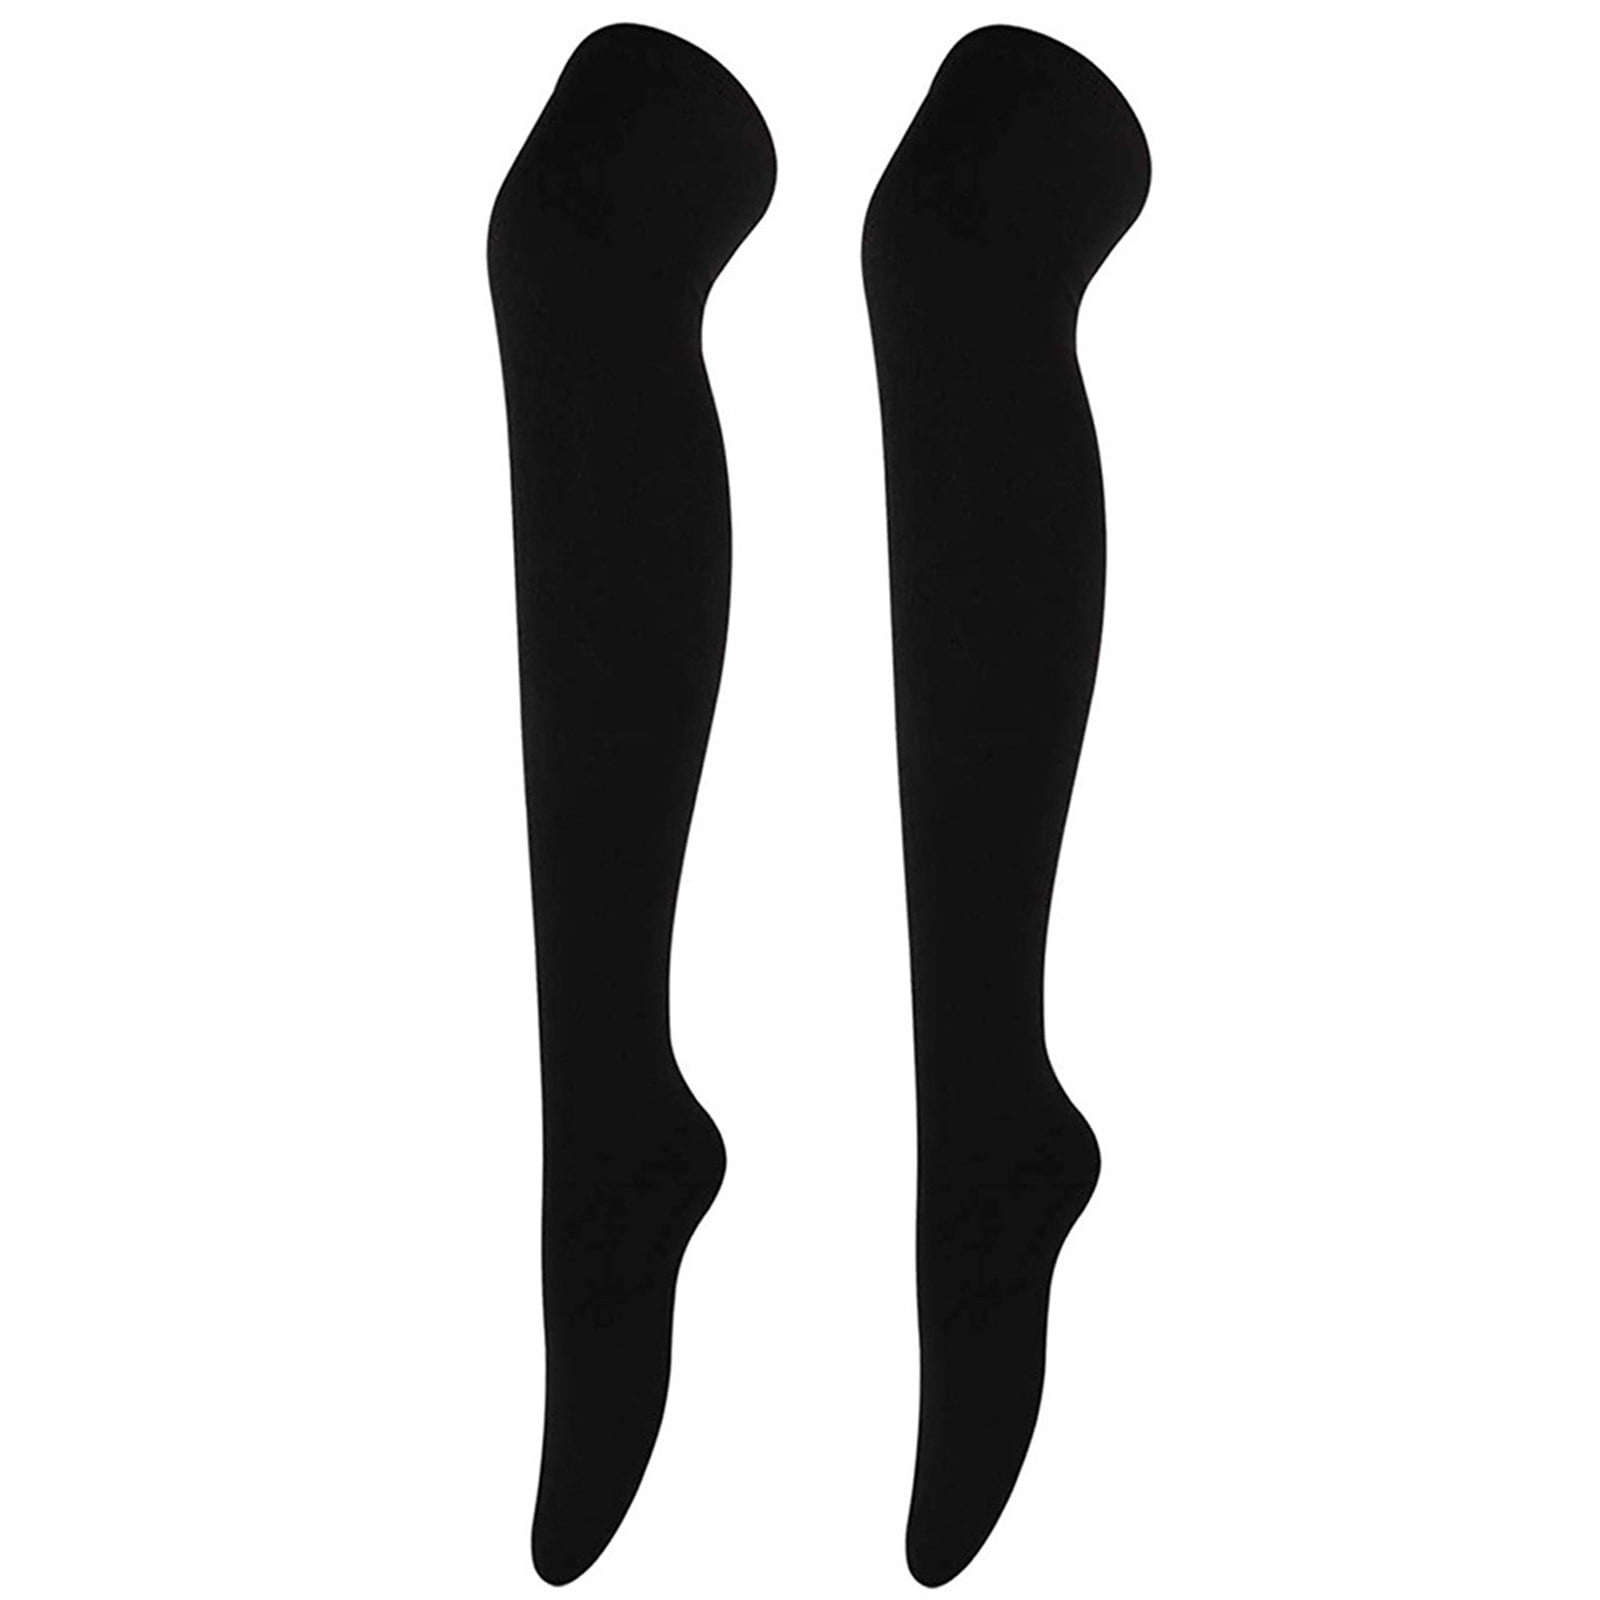 Frehsky long socks for women 1 Pairs Women's Fashion Solid Color Over ...